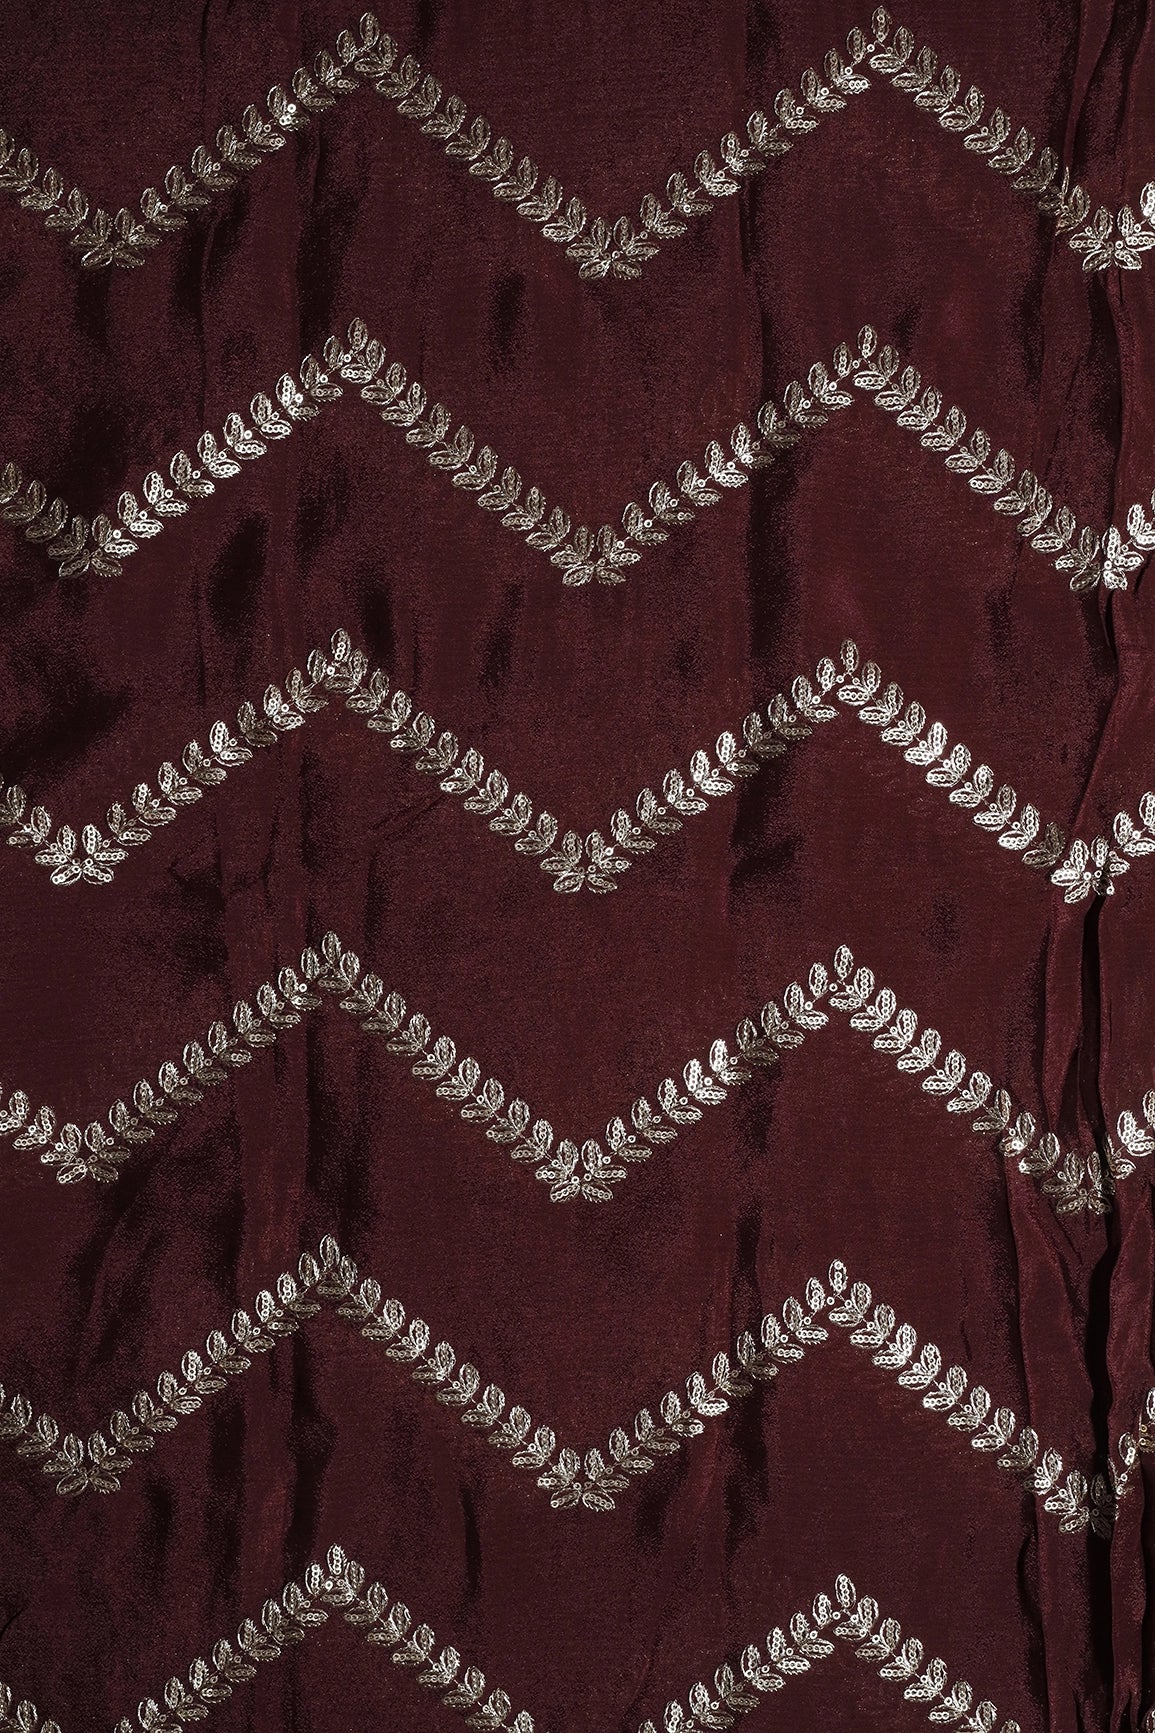 Gold Zari With Gold Sequins Chevron Embroidery Work On Maroon Chinnon Chiffon Fabric